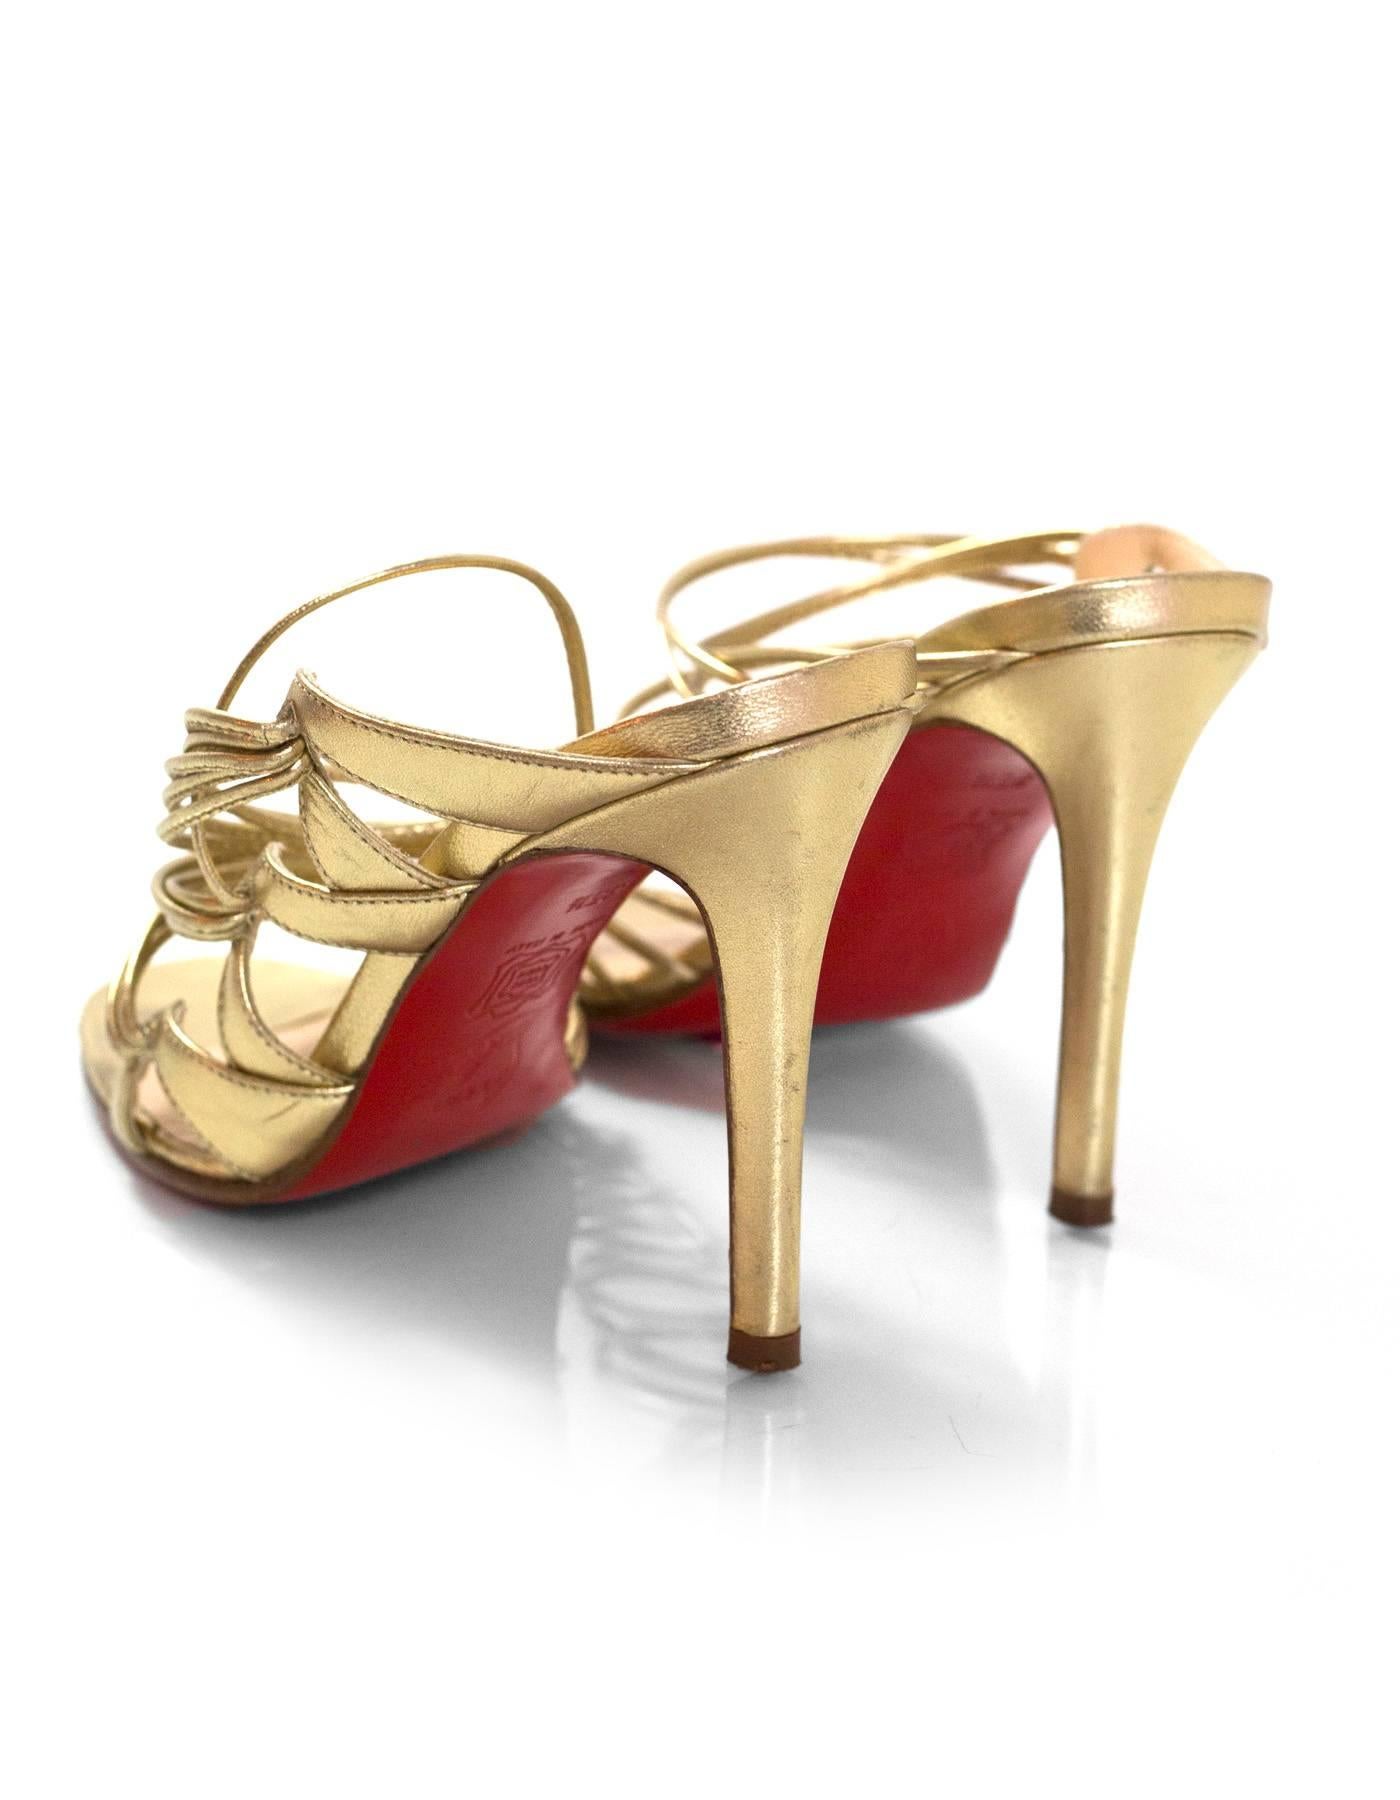 Brown Christian Louboutin Gold Strappy Sandals Sz 35.5